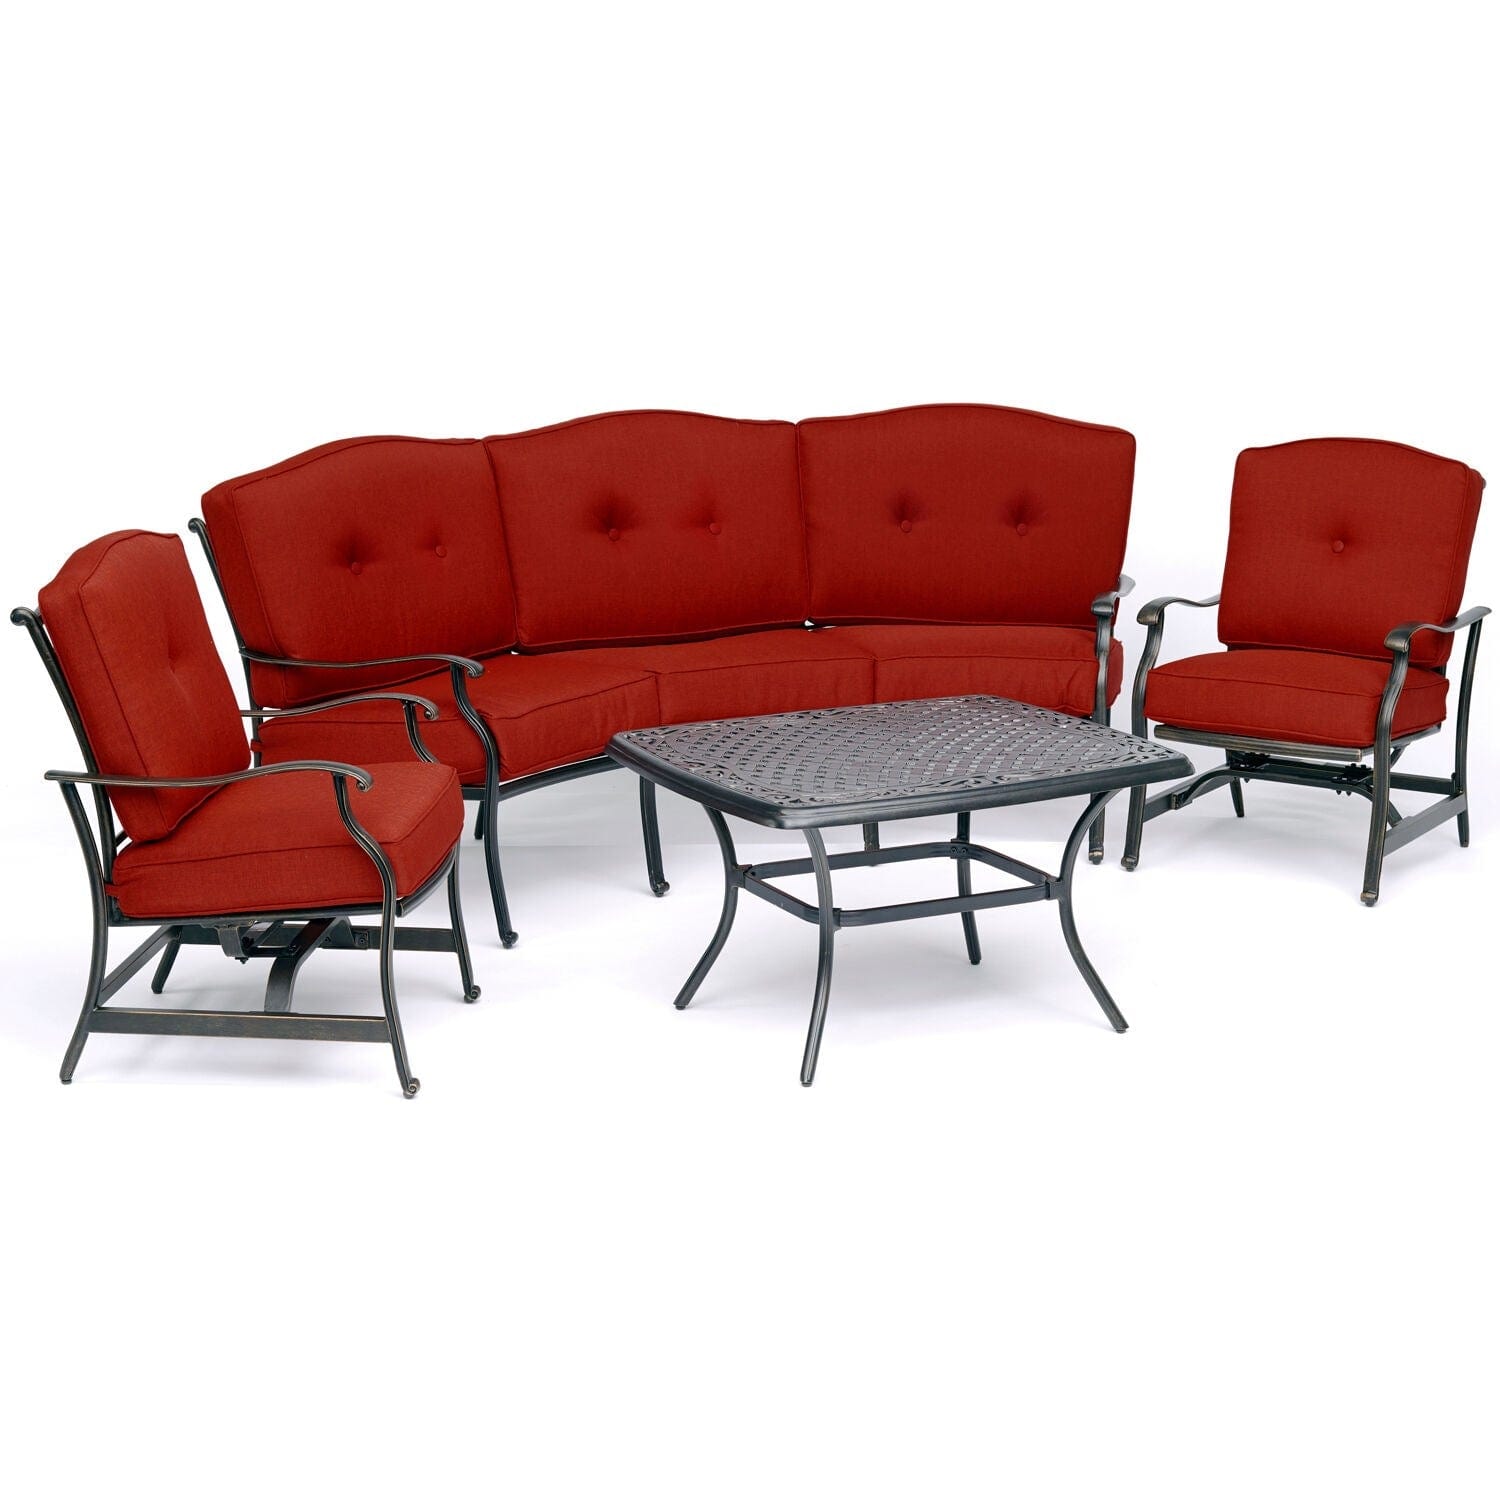 Hanover - Traditions 4-Piece Aluminum Patio Conversation Set with Red Cushion, Cast-Top Coffee Table, Sofa and 2-Rockers | TRAD4PCCT-RED